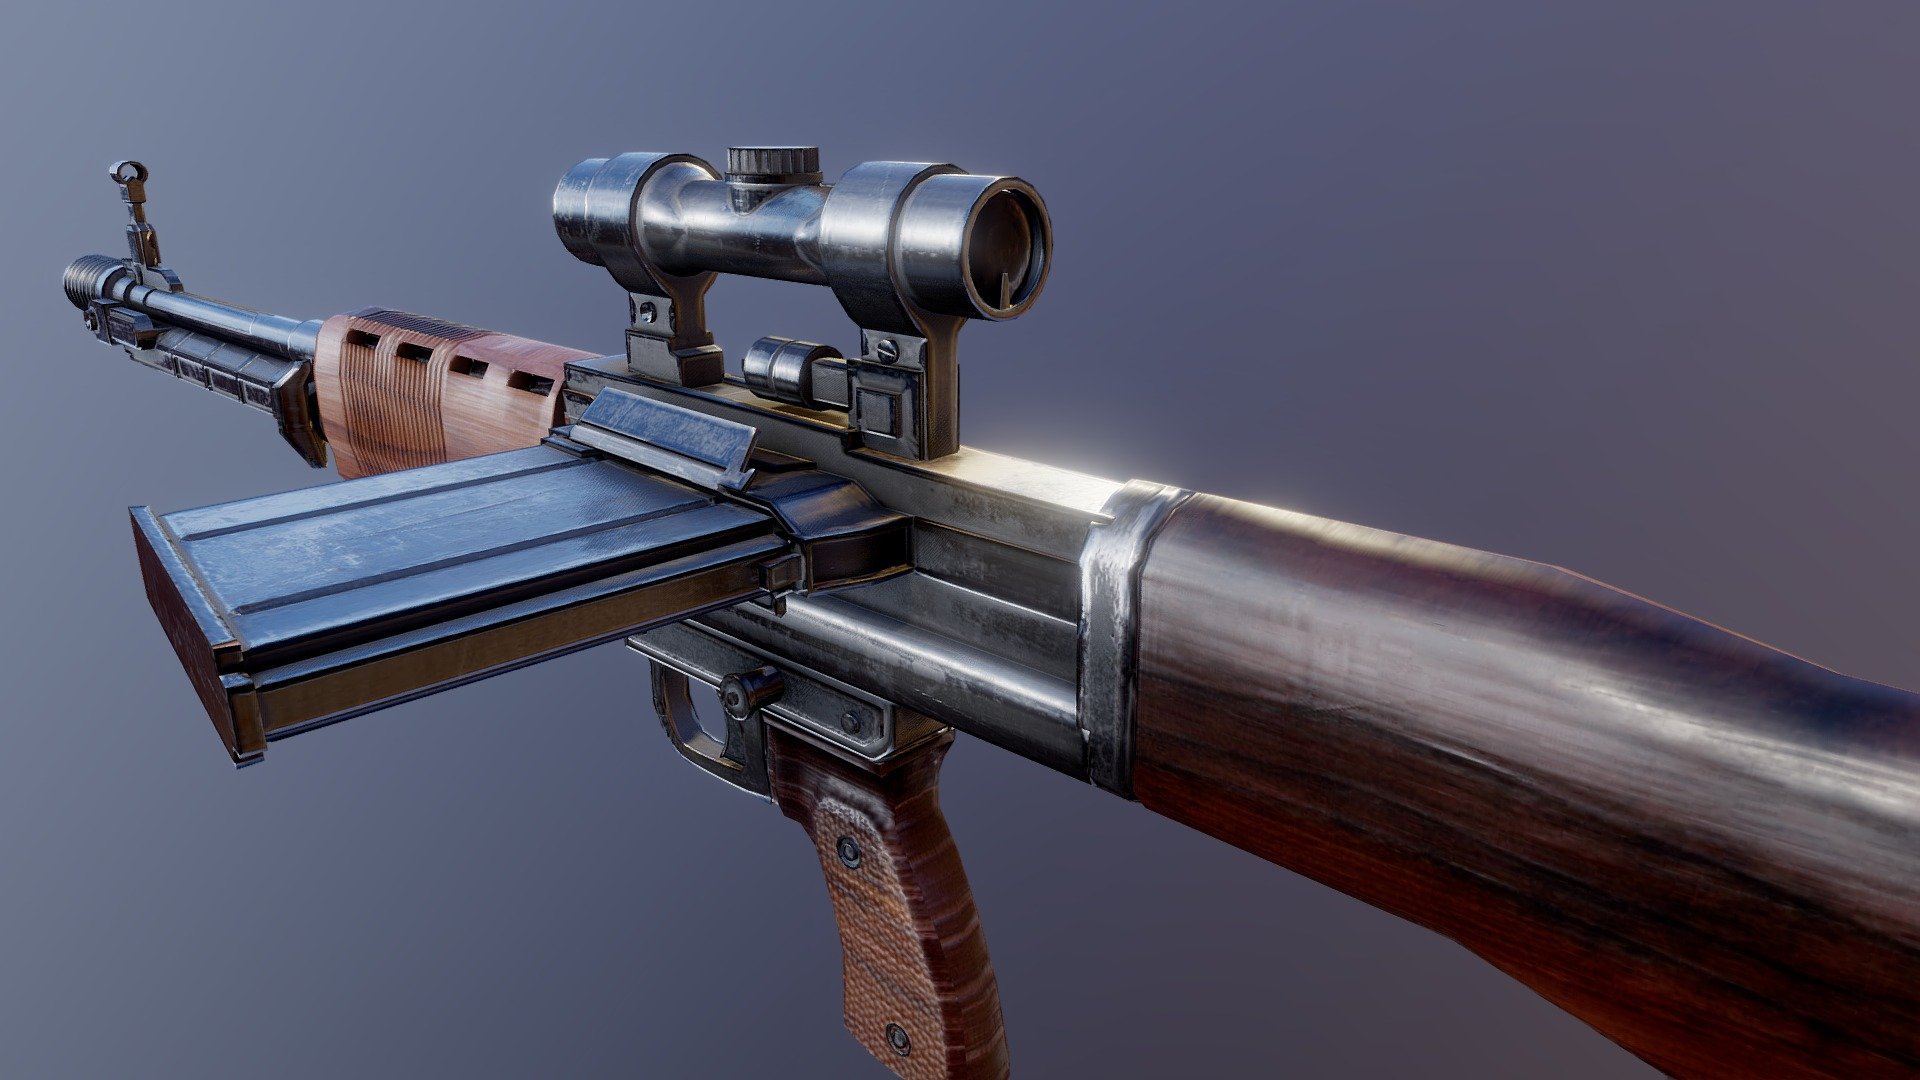 My first upload, i'm also fairly new to 3D modelling.

This is the Fallschirmjägergewehr 42, or FG 42.
It was made for german Paratroopers as it was a very lightweight rifle. 
The FG 42 is considered one of the most advanced weapon designs of the World War 2.

New version: https://sketchfab.com/3d-models/fallschirmjagergewehr-42-226f43a7c3894e48b2af5cd3dde9f5e6 - FG 42 (OLD) - 3D model by Joe-Louis (@Dikkiedik) 3d model